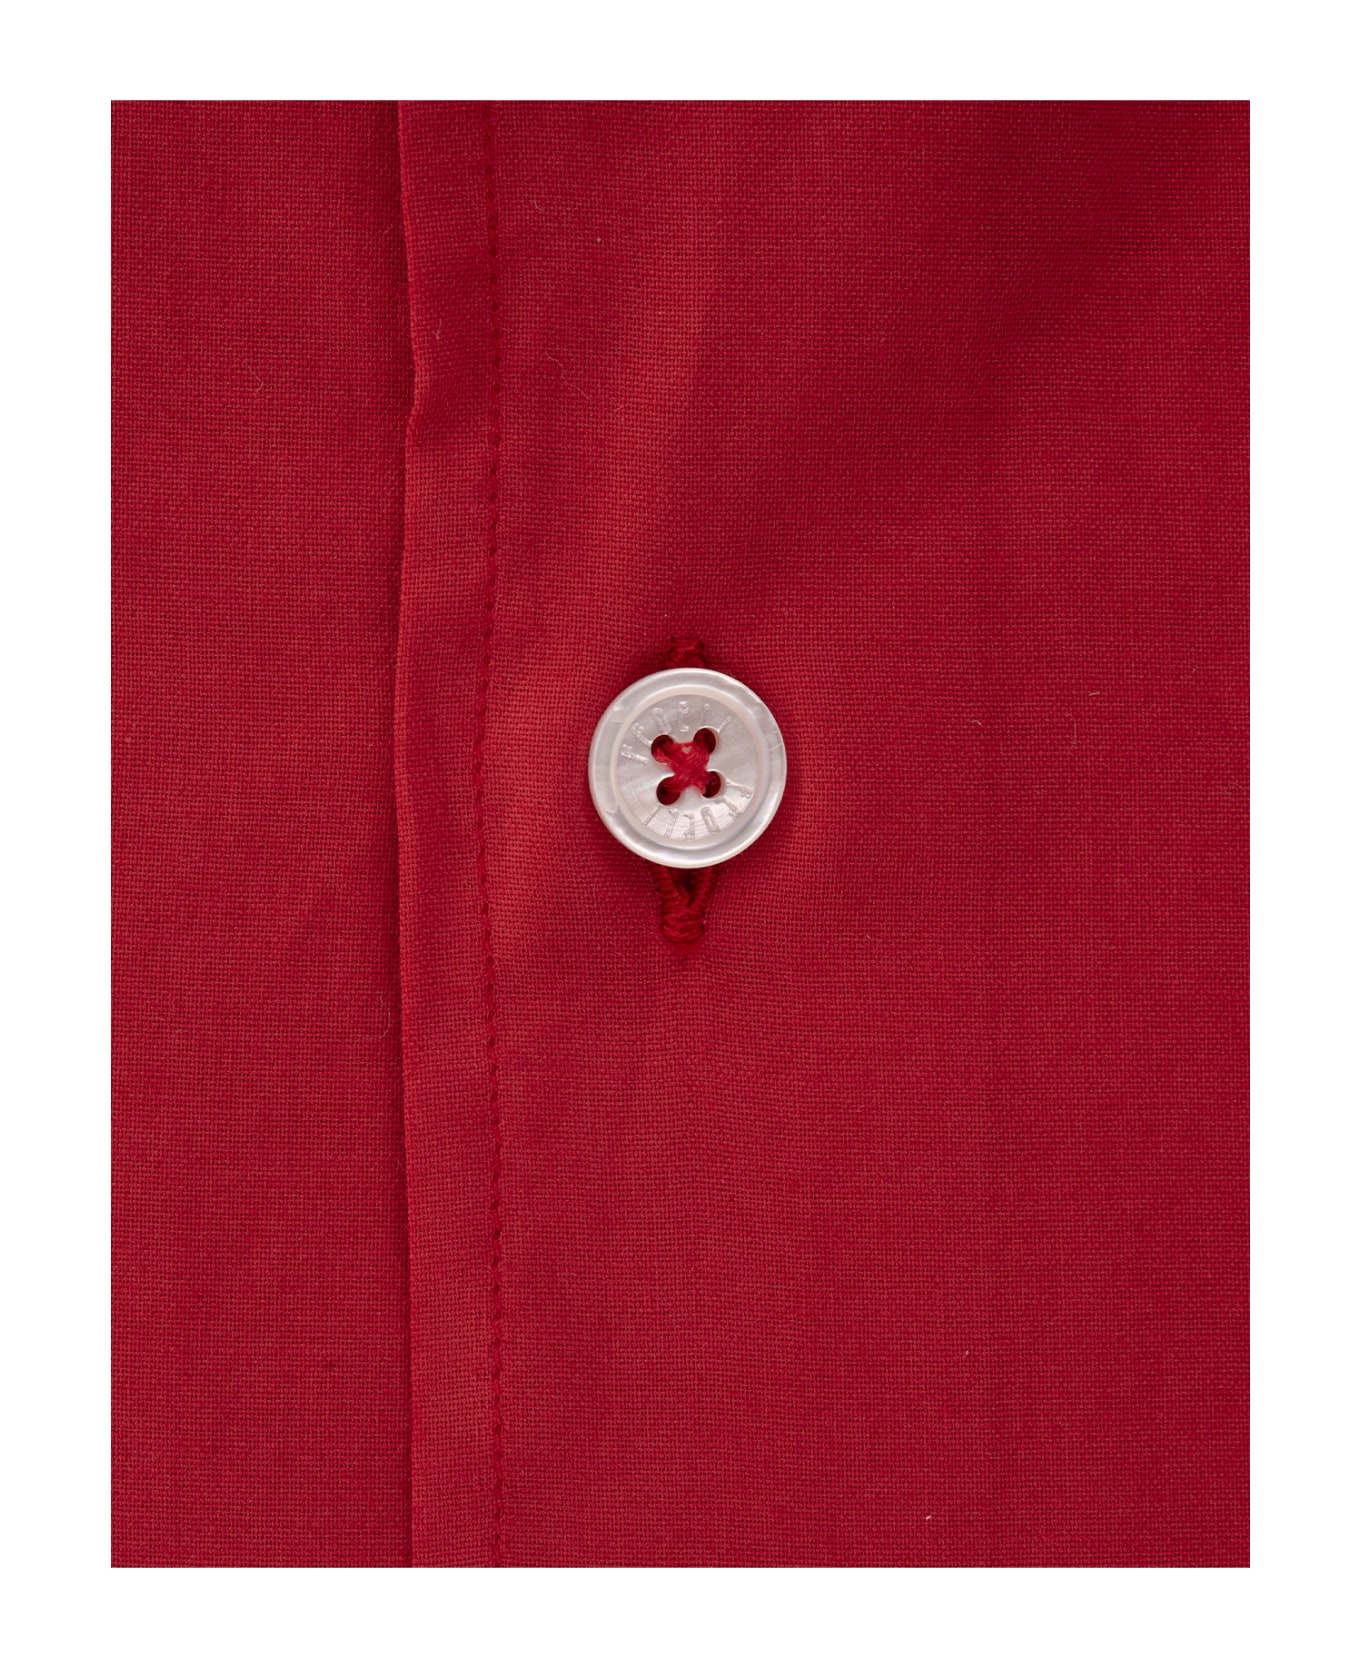 Fedeli Sean Shirt In Red Panamino - Red